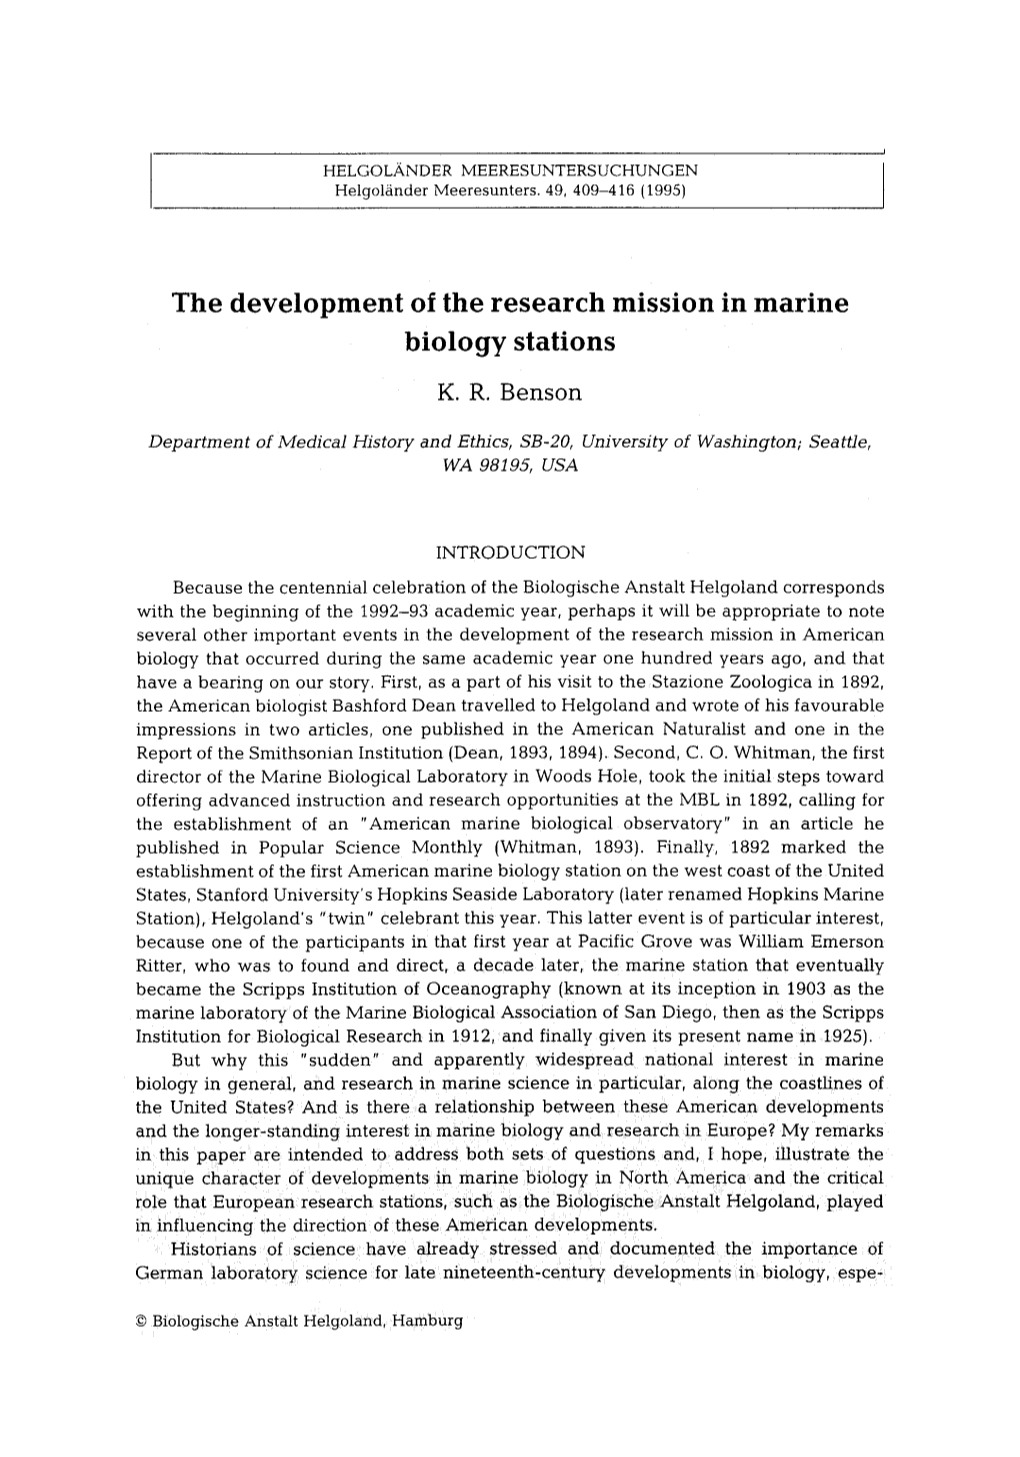 The Development of the Research Mission in Marine Biology Stations